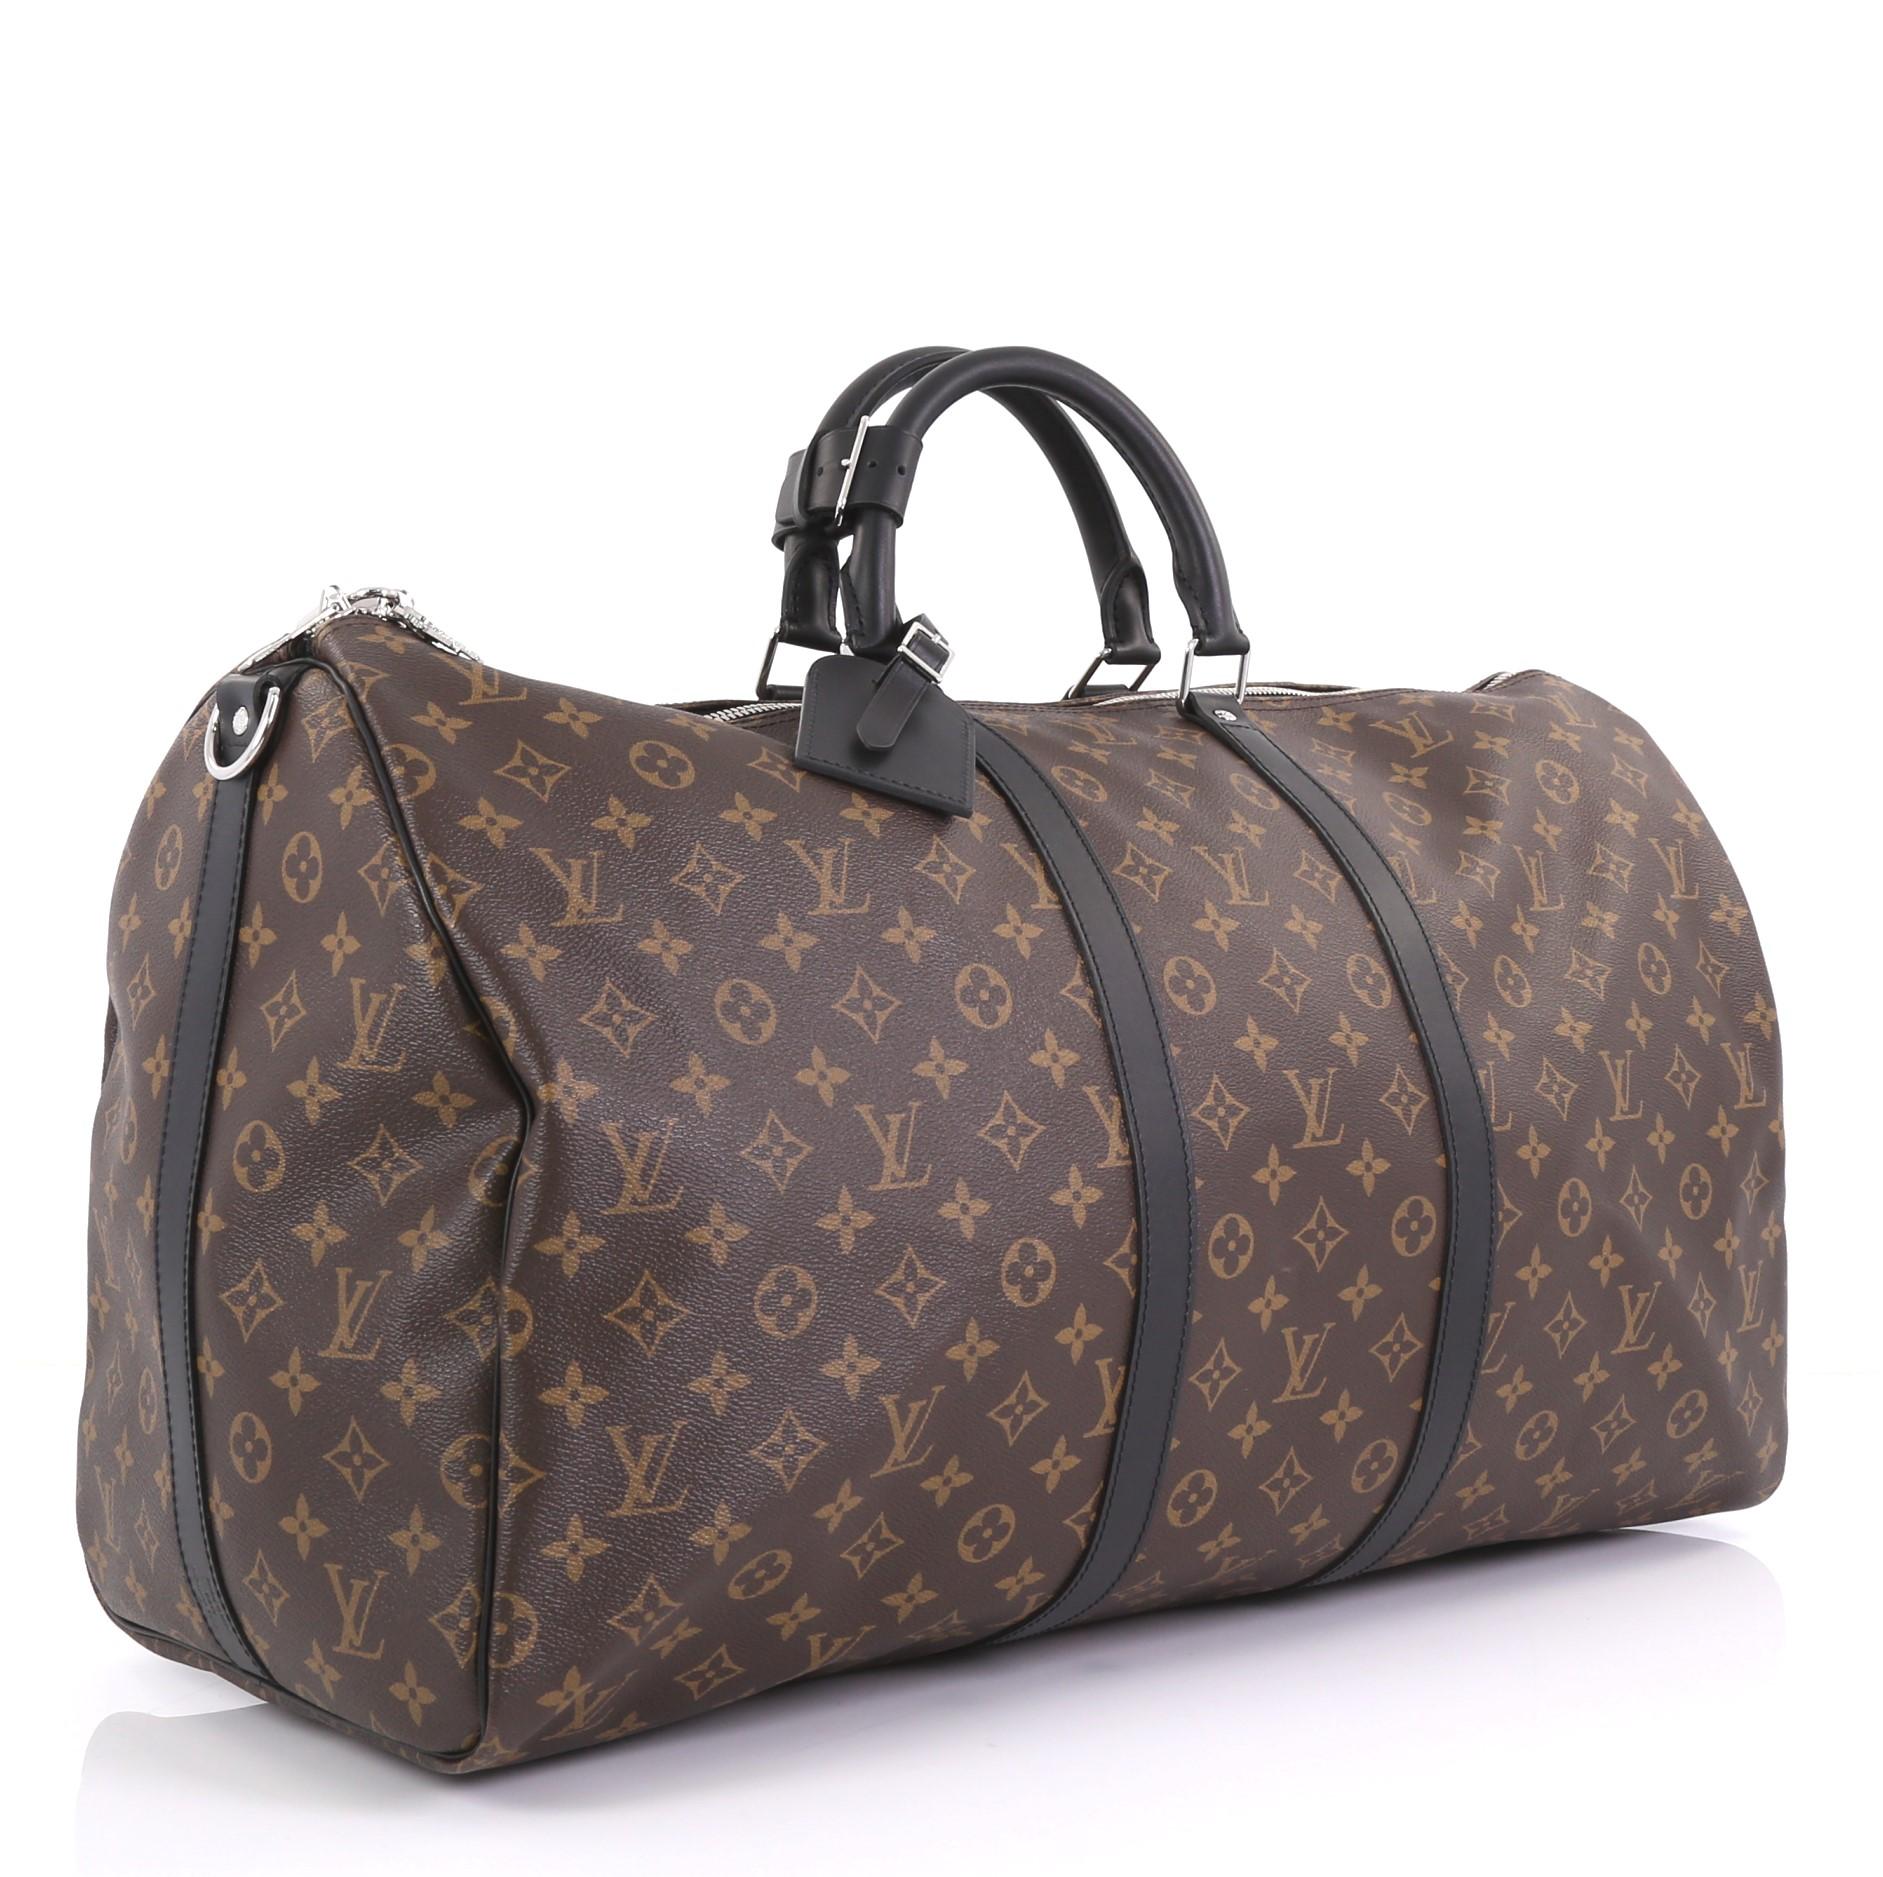 This Louis Vuitton Keepall Bandouliere Bag Macassar Monogram Canvas 55, crafted in brown macassar monogram coated canvas, features dual rolled leather handles, black leather trim, and silver-tone hardware. Its two-way zip closure opens to a burgundy